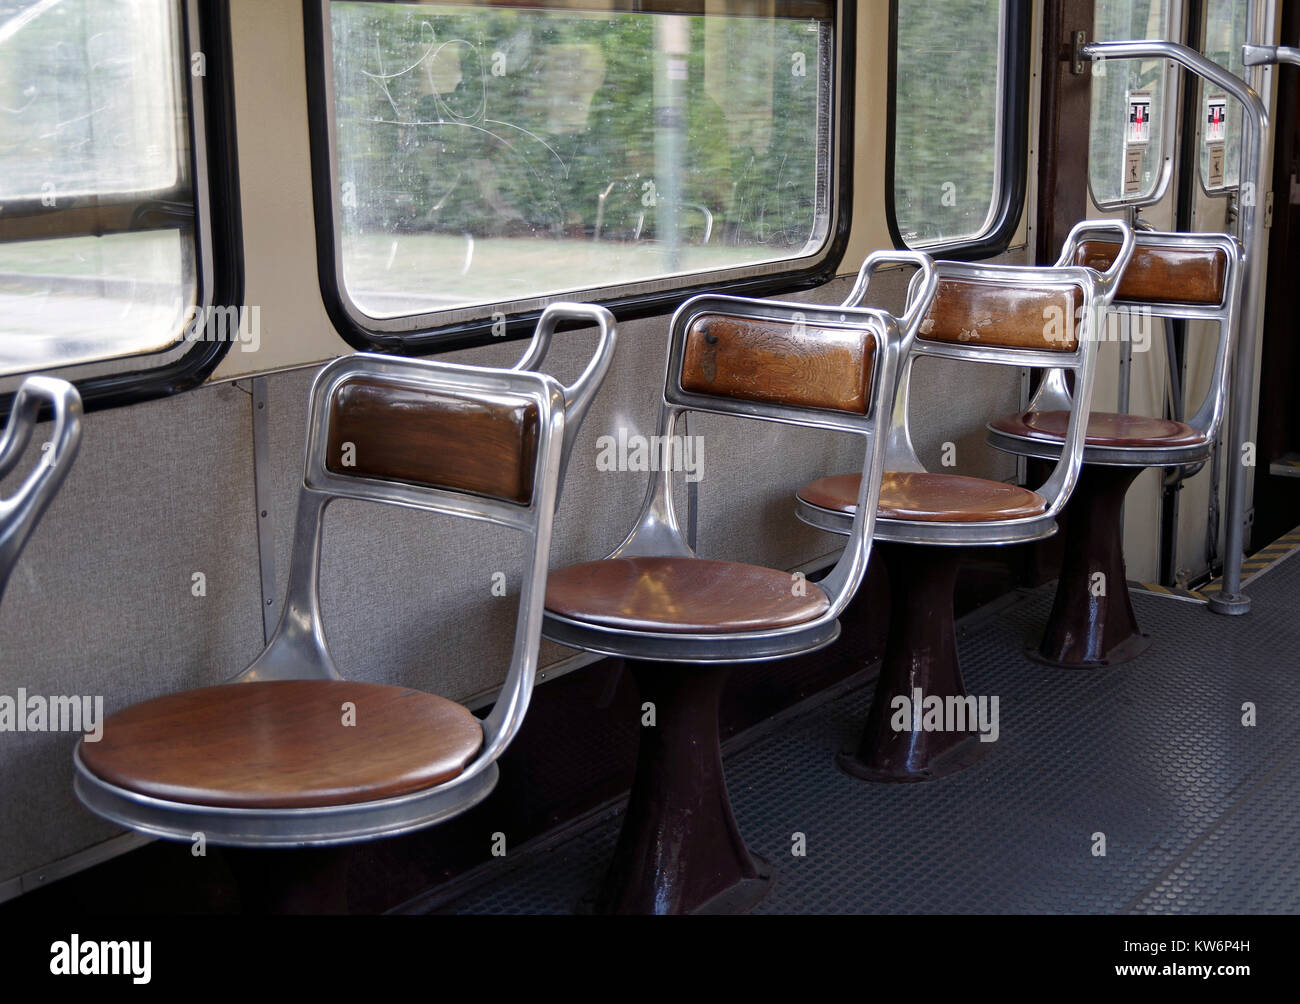 Interior of Tram on Route 15, in Turin, Italy, with elegant “Moderne” metal and leather seats. Stock Photo